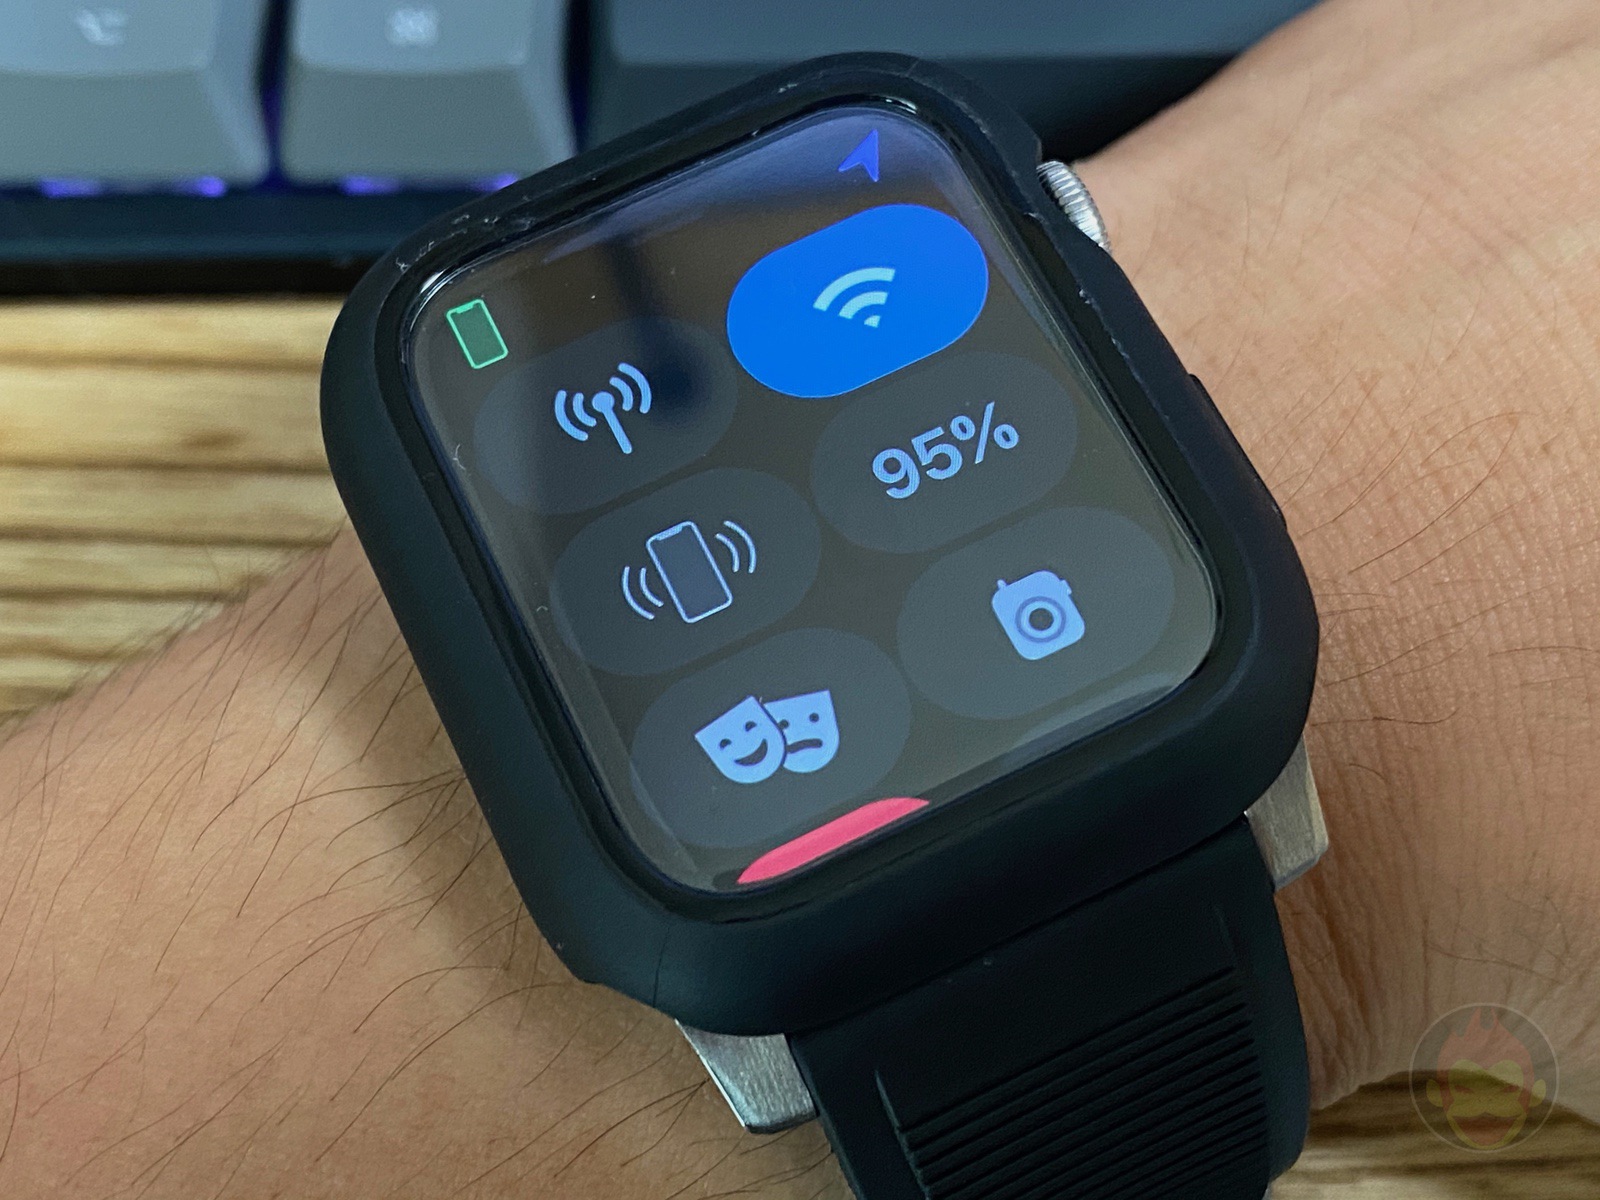 AppleWatchSeries6 With AODisplay OFF 06